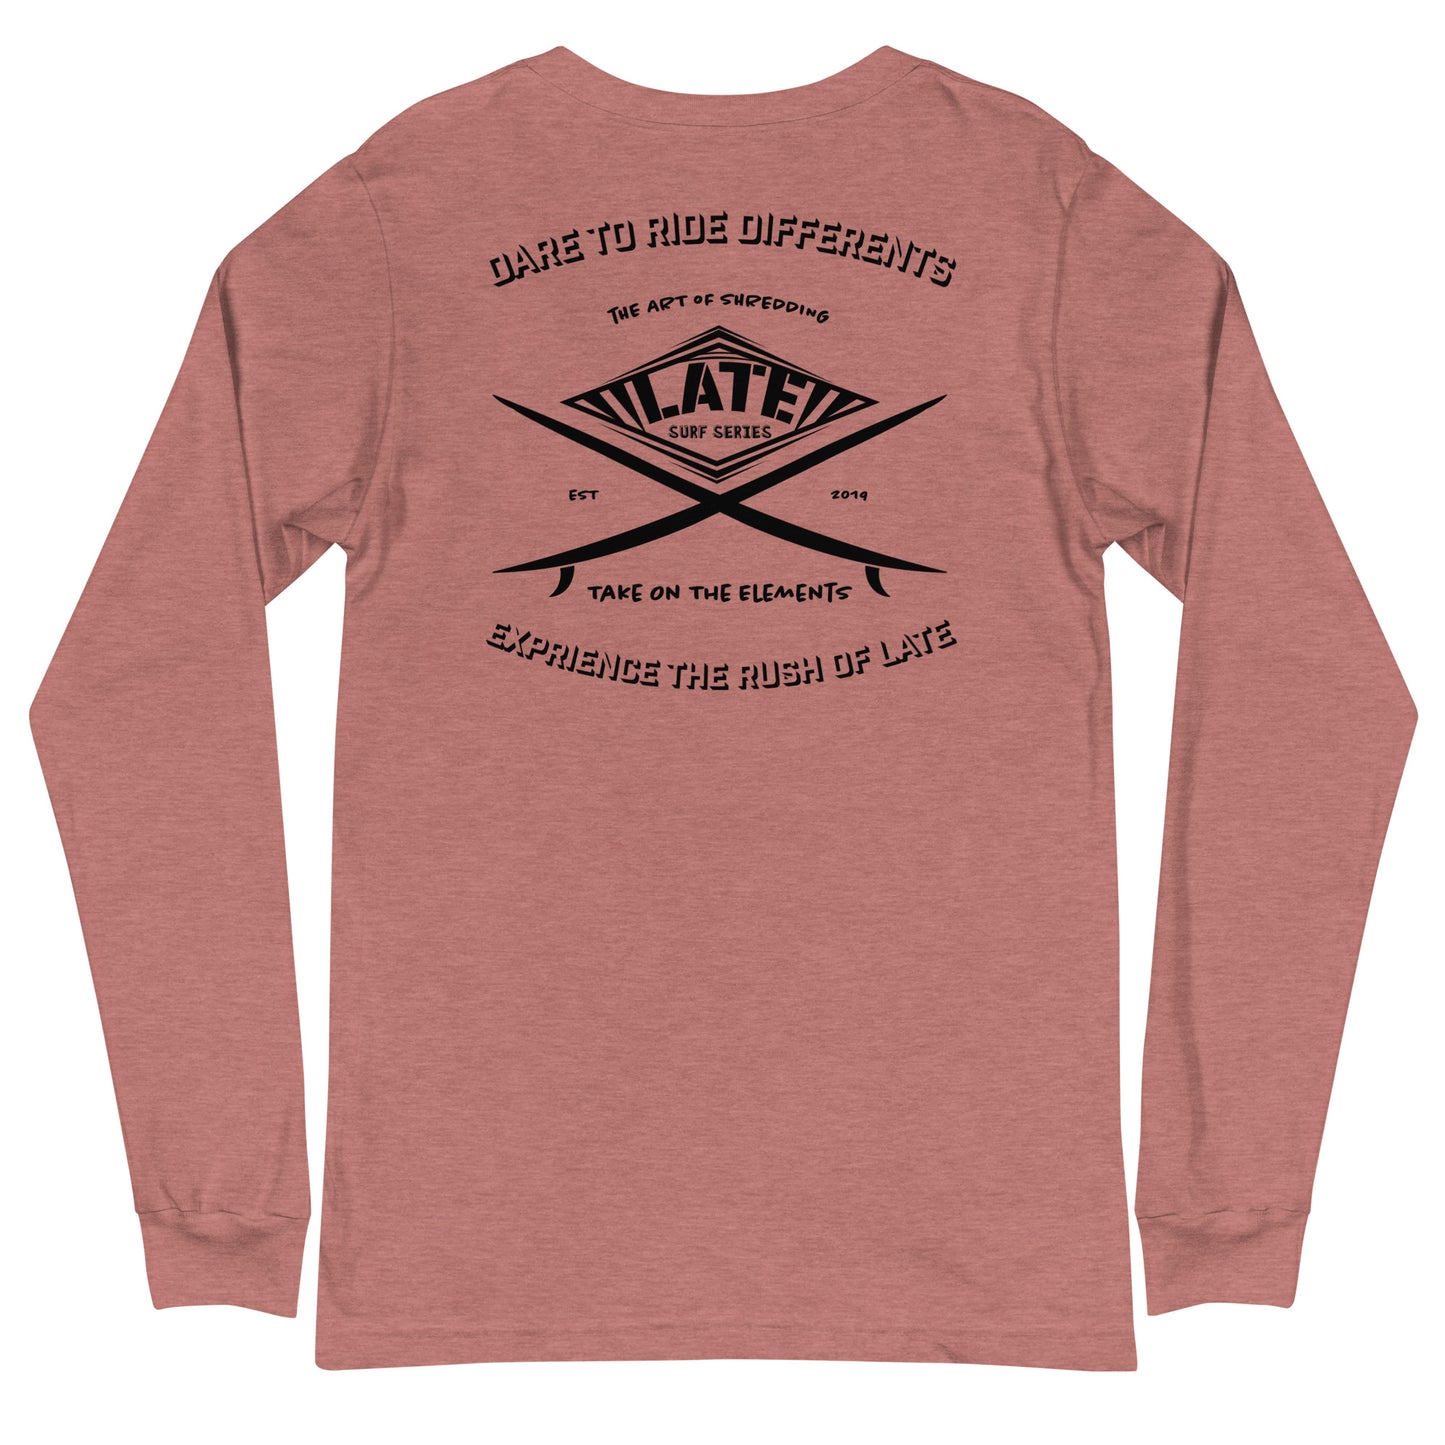 Long Sleeve surf vintage Take On The Elements Logo Late surf series, texte dare to ride differents couleur mauve